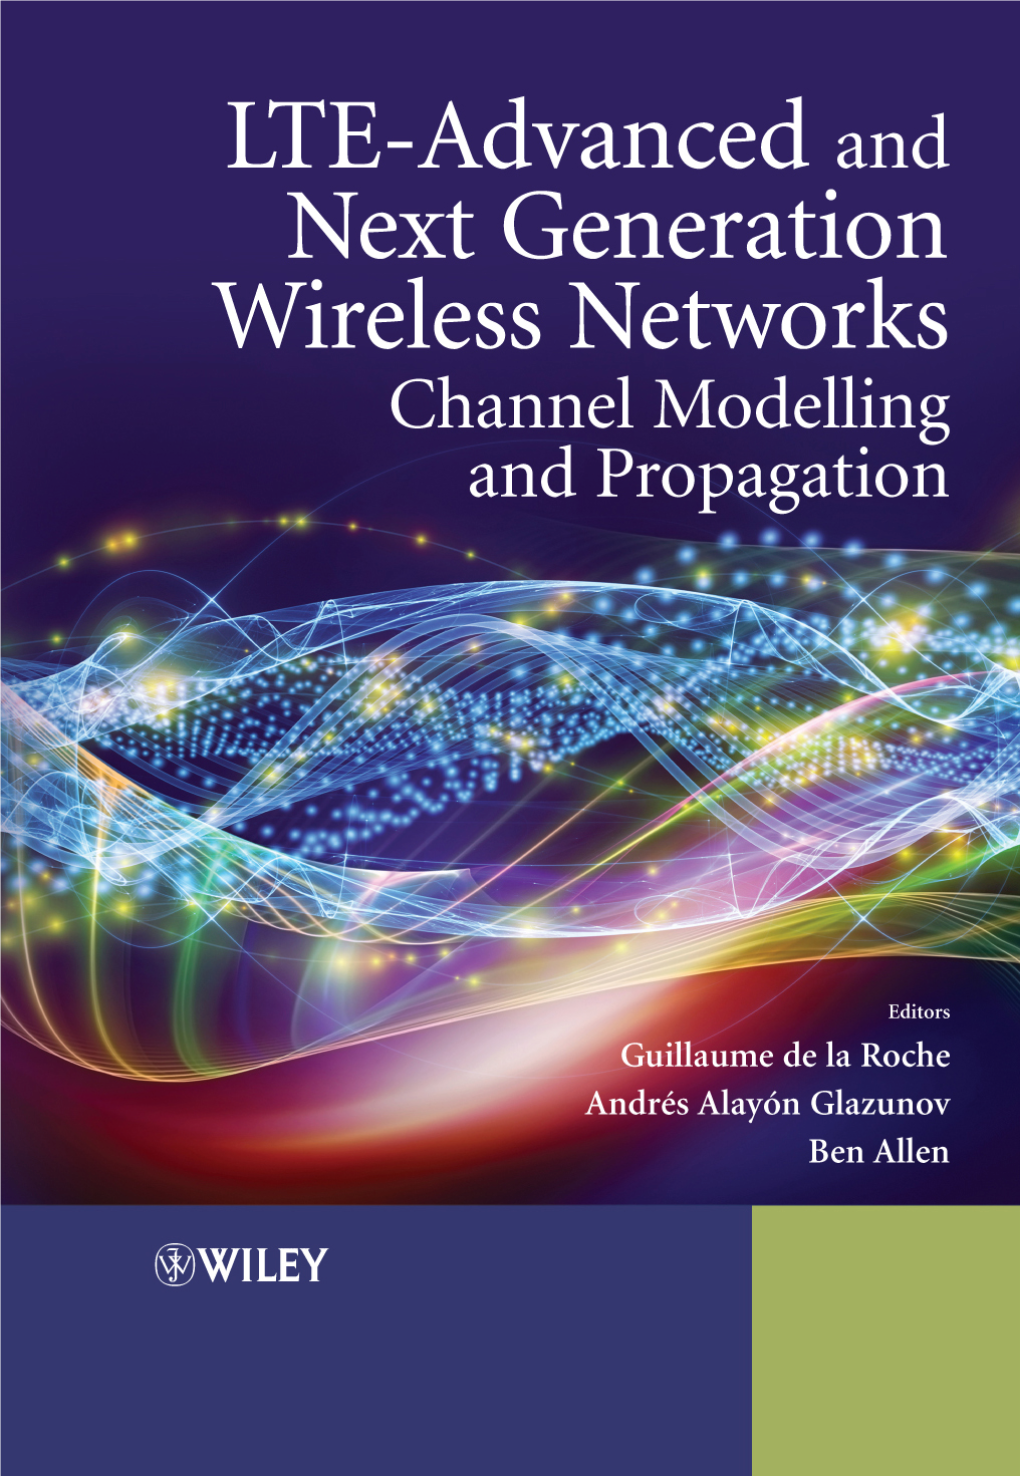 Lte-Advanced and Next Generation Wireless Networks Channel Modelling and Propagation